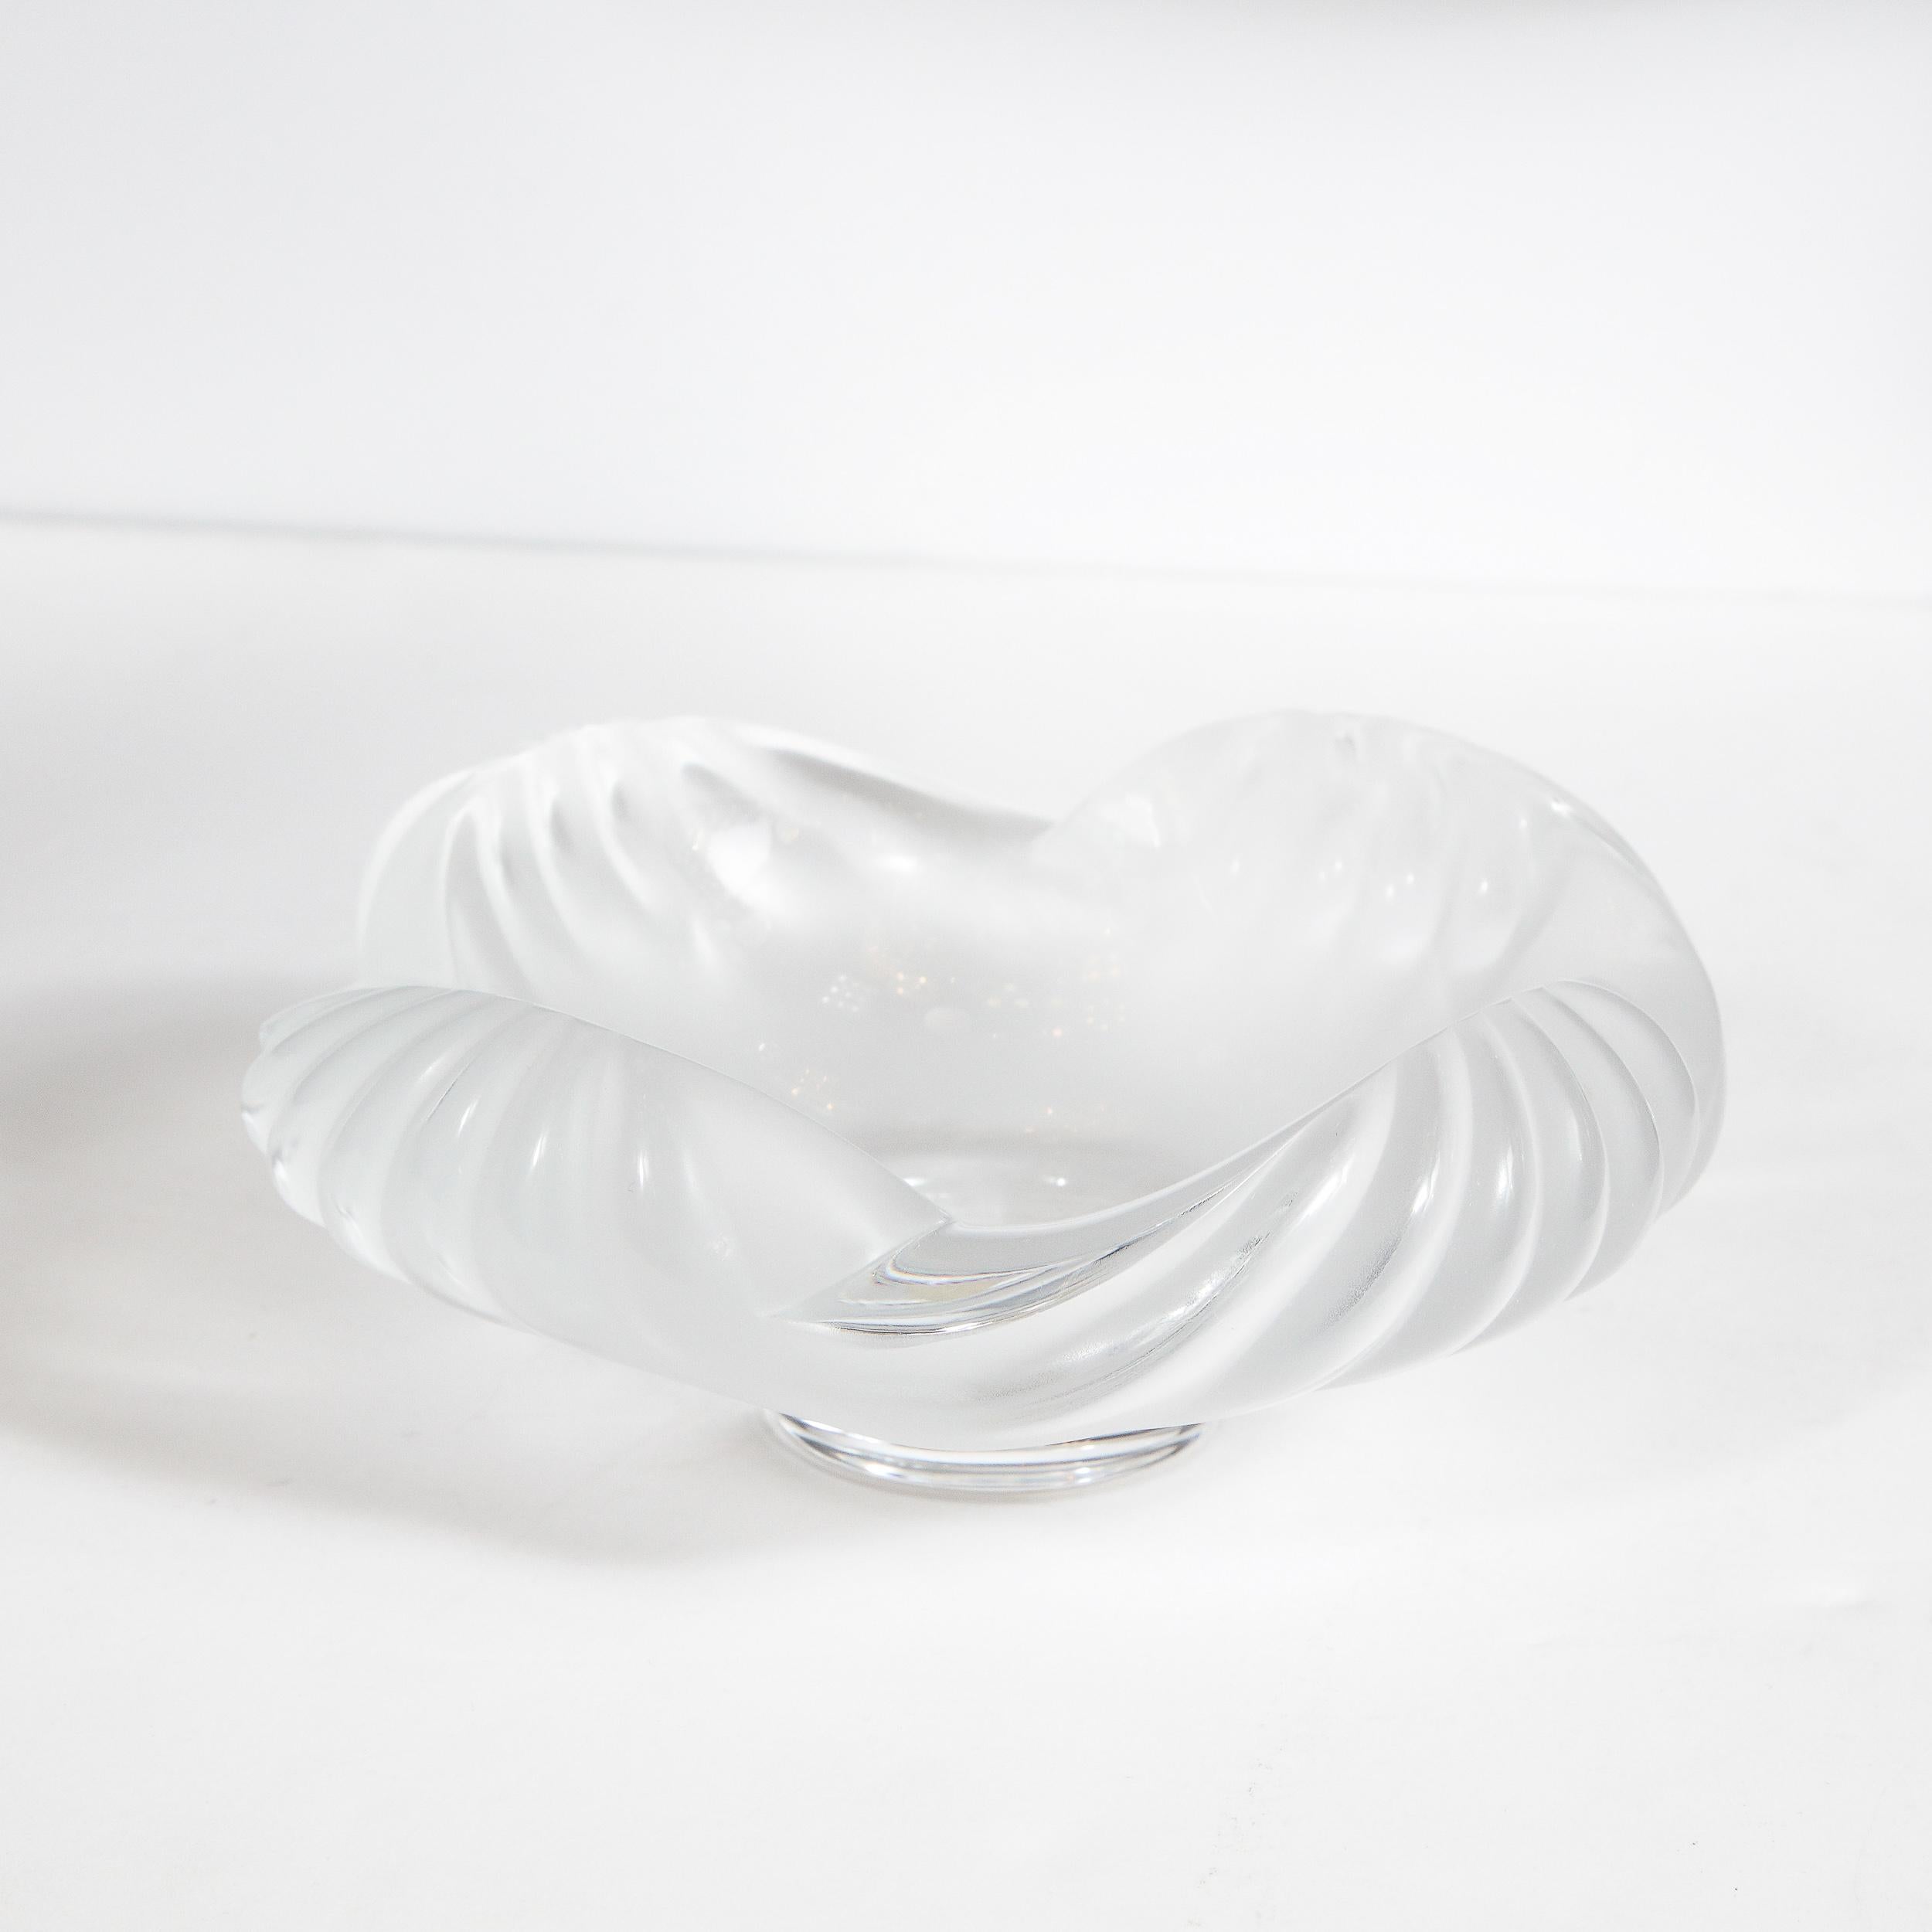 Modernist Translucent and Frosted Channeled Crystal Bowl Signed Lalique In Excellent Condition For Sale In New York, NY